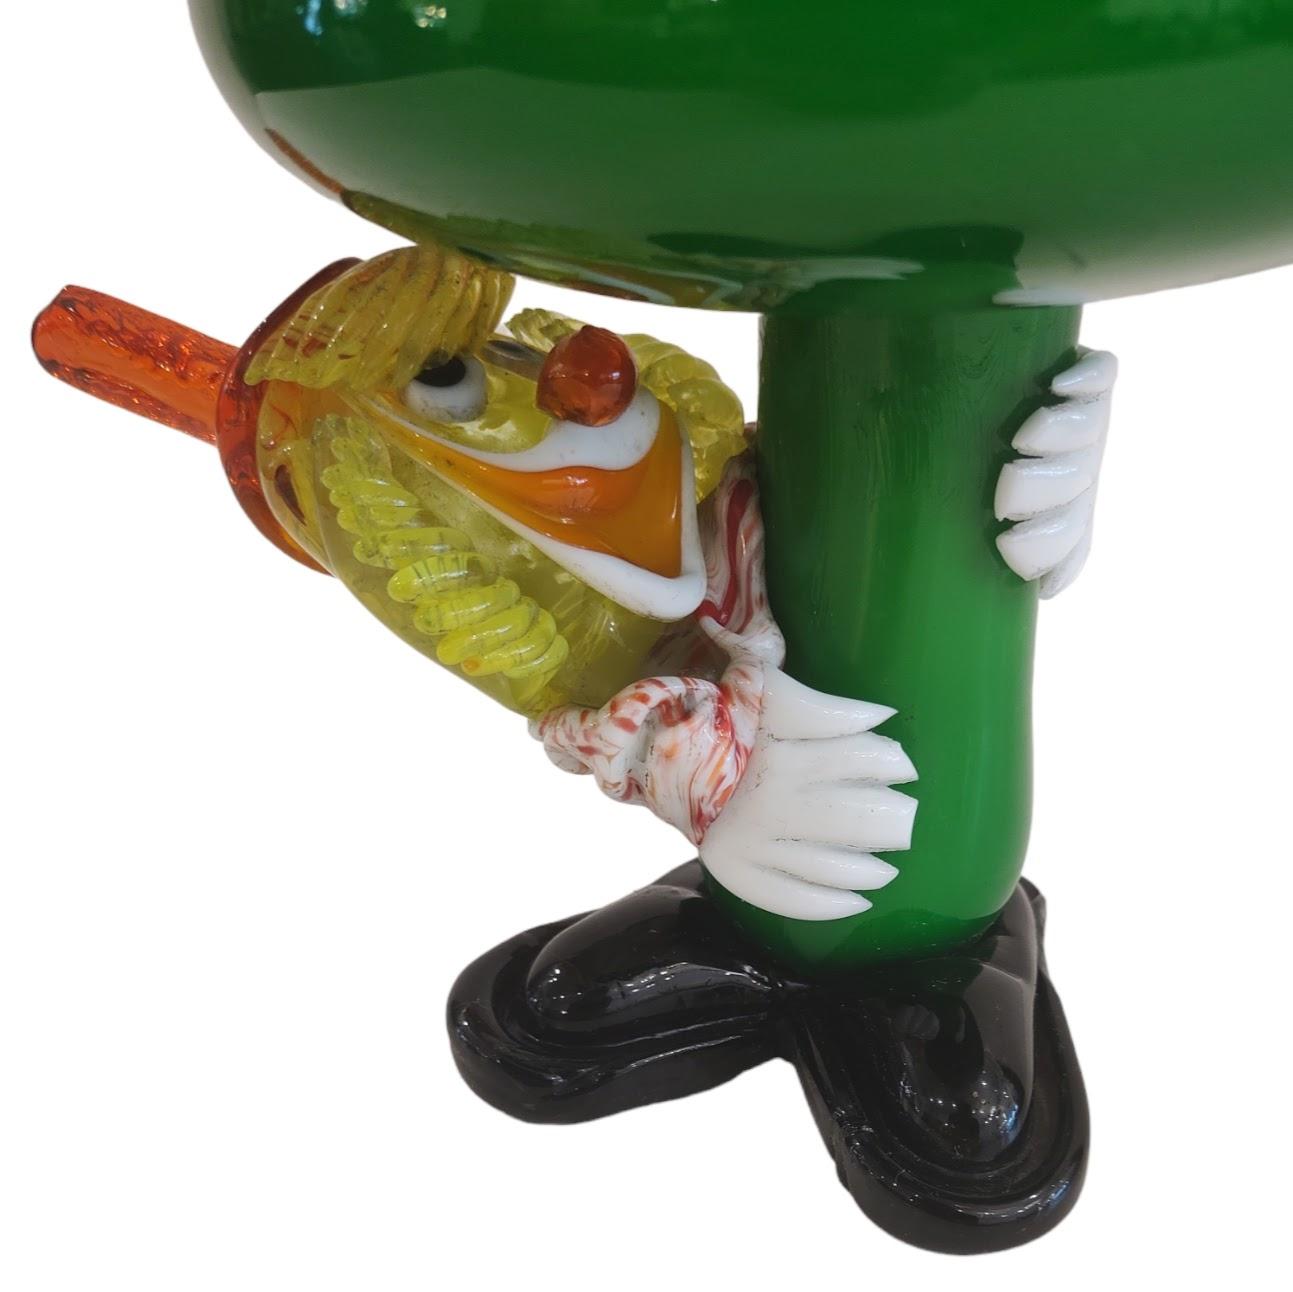 Venetian Murano Clown Under The Mushroom 
Murano, Italy art glass clown and mushroom figurine. The clown is holding on to the mushroom stem and looking around the side; he is made of colorful art glass. This is a nice piece of Murano glass.Thanks